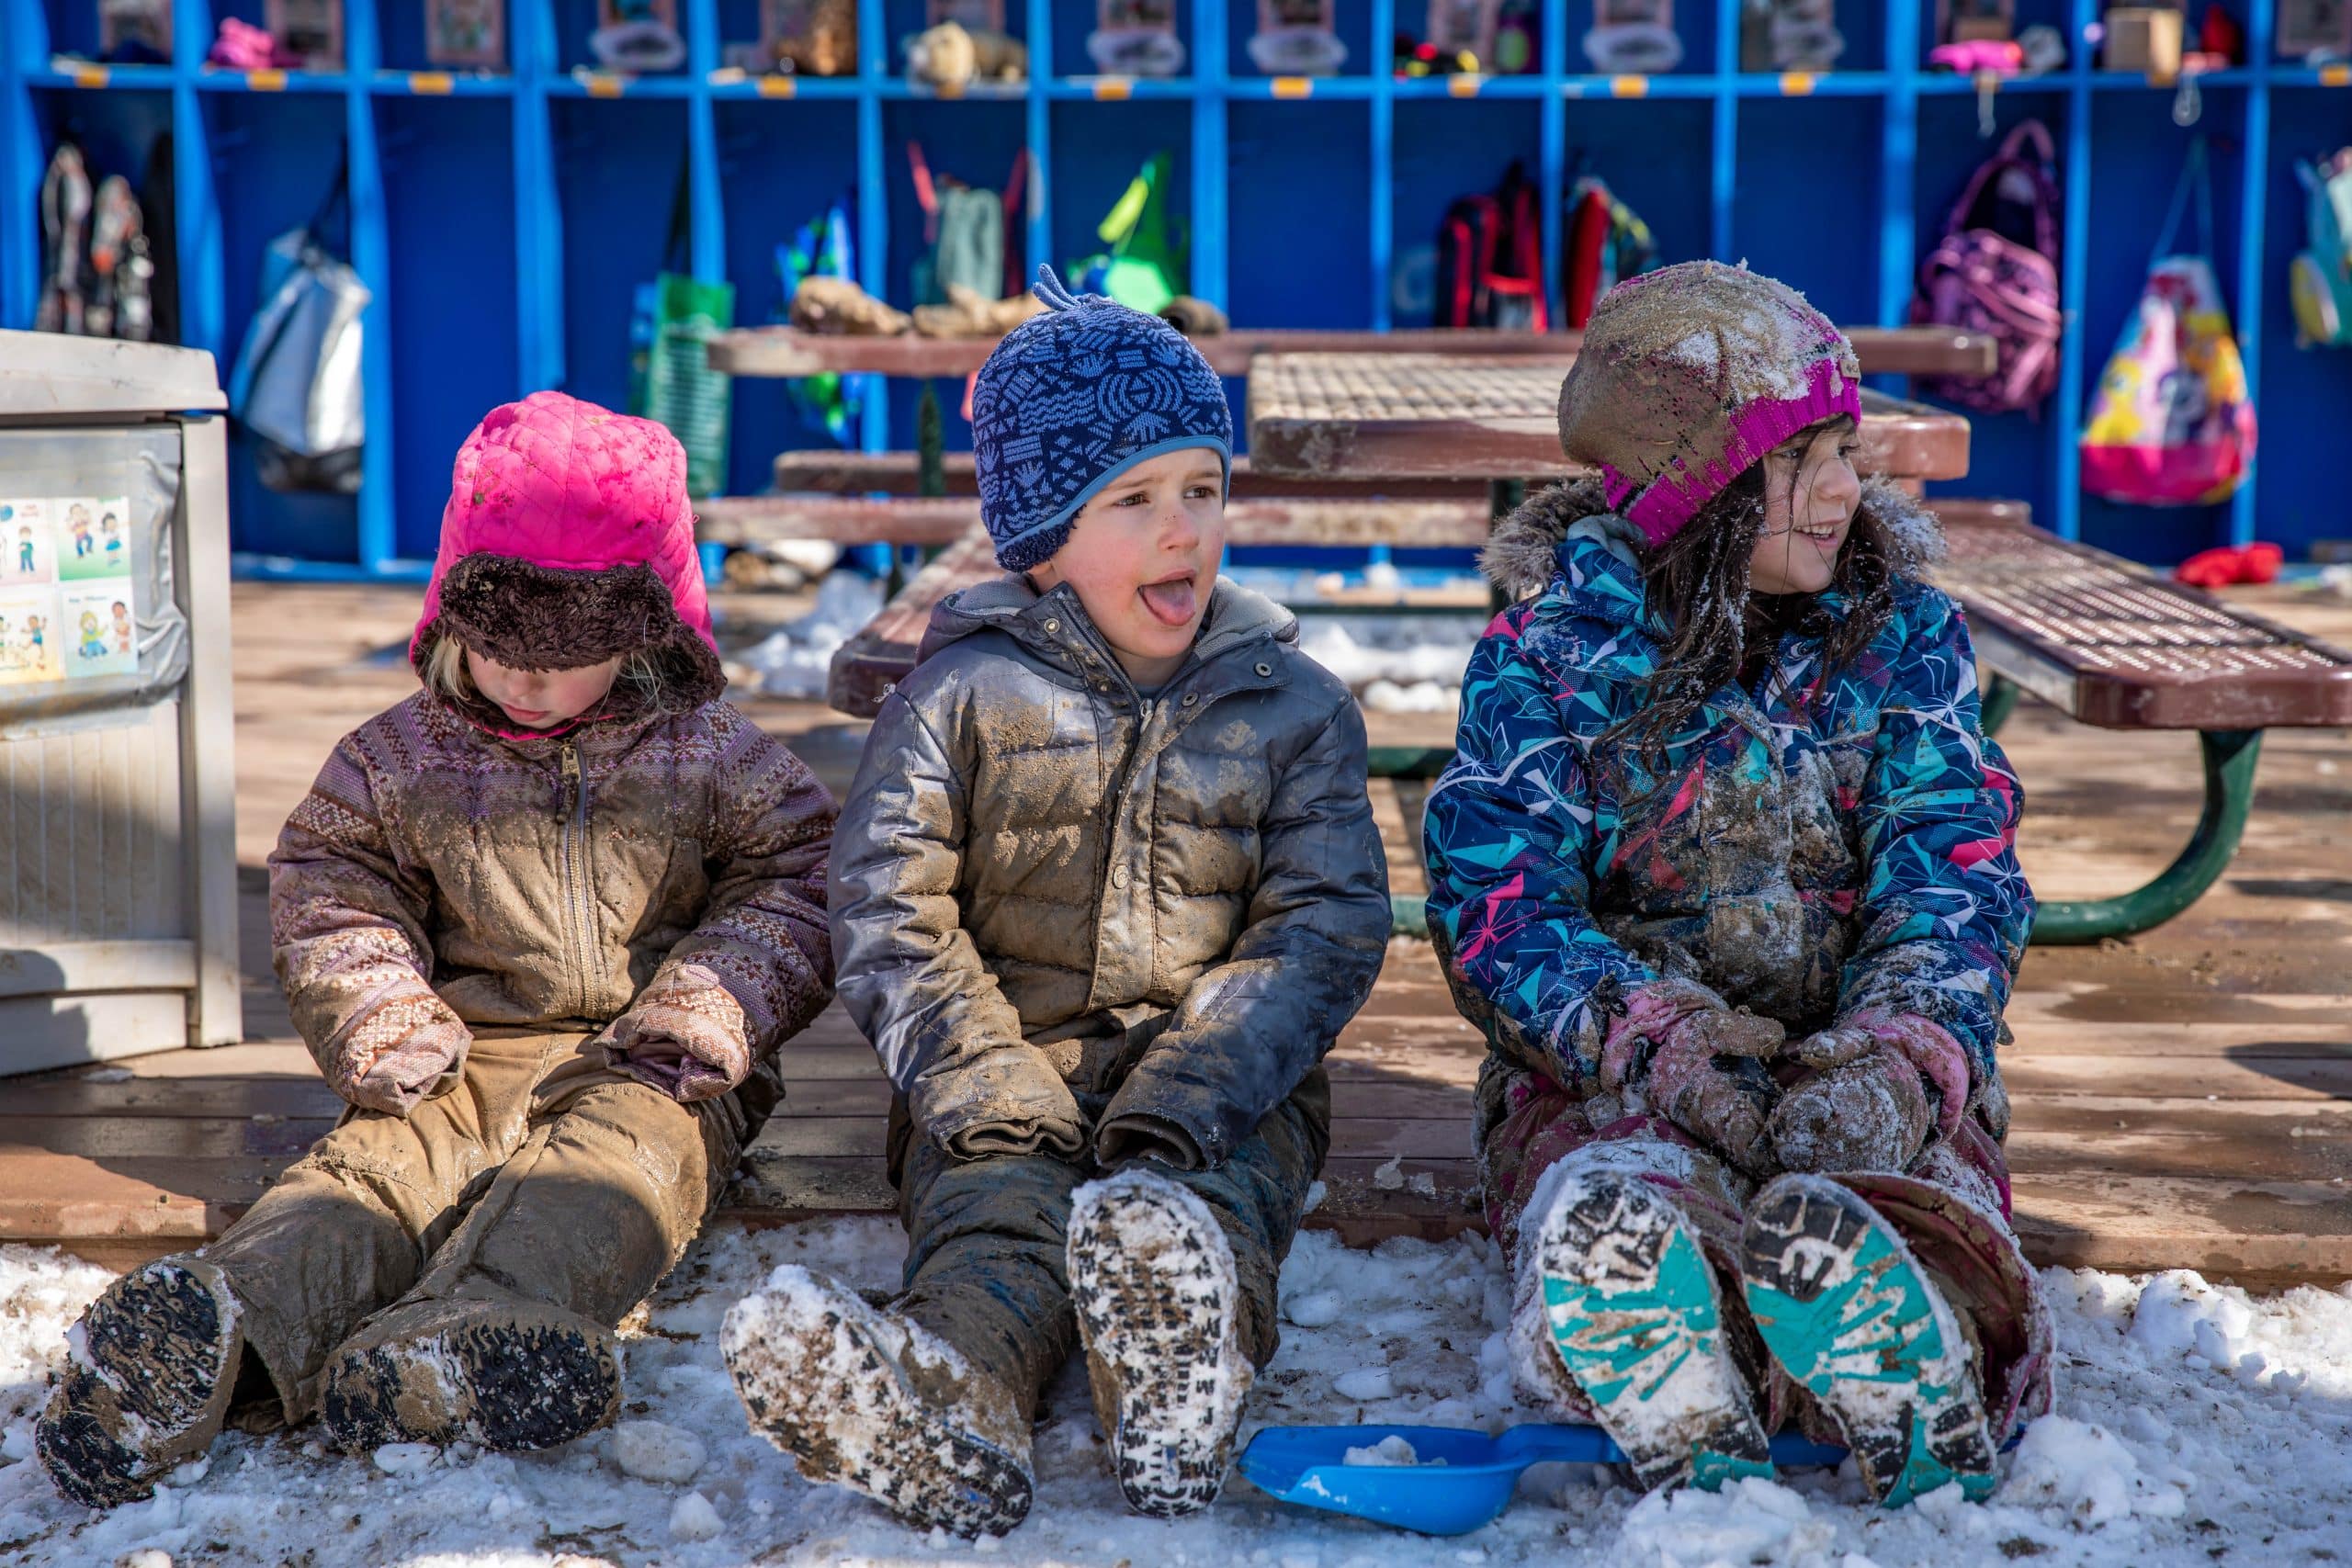 three children, wearing snow gear and covered in mud, sit on a deck in front of a row of blue cubbies